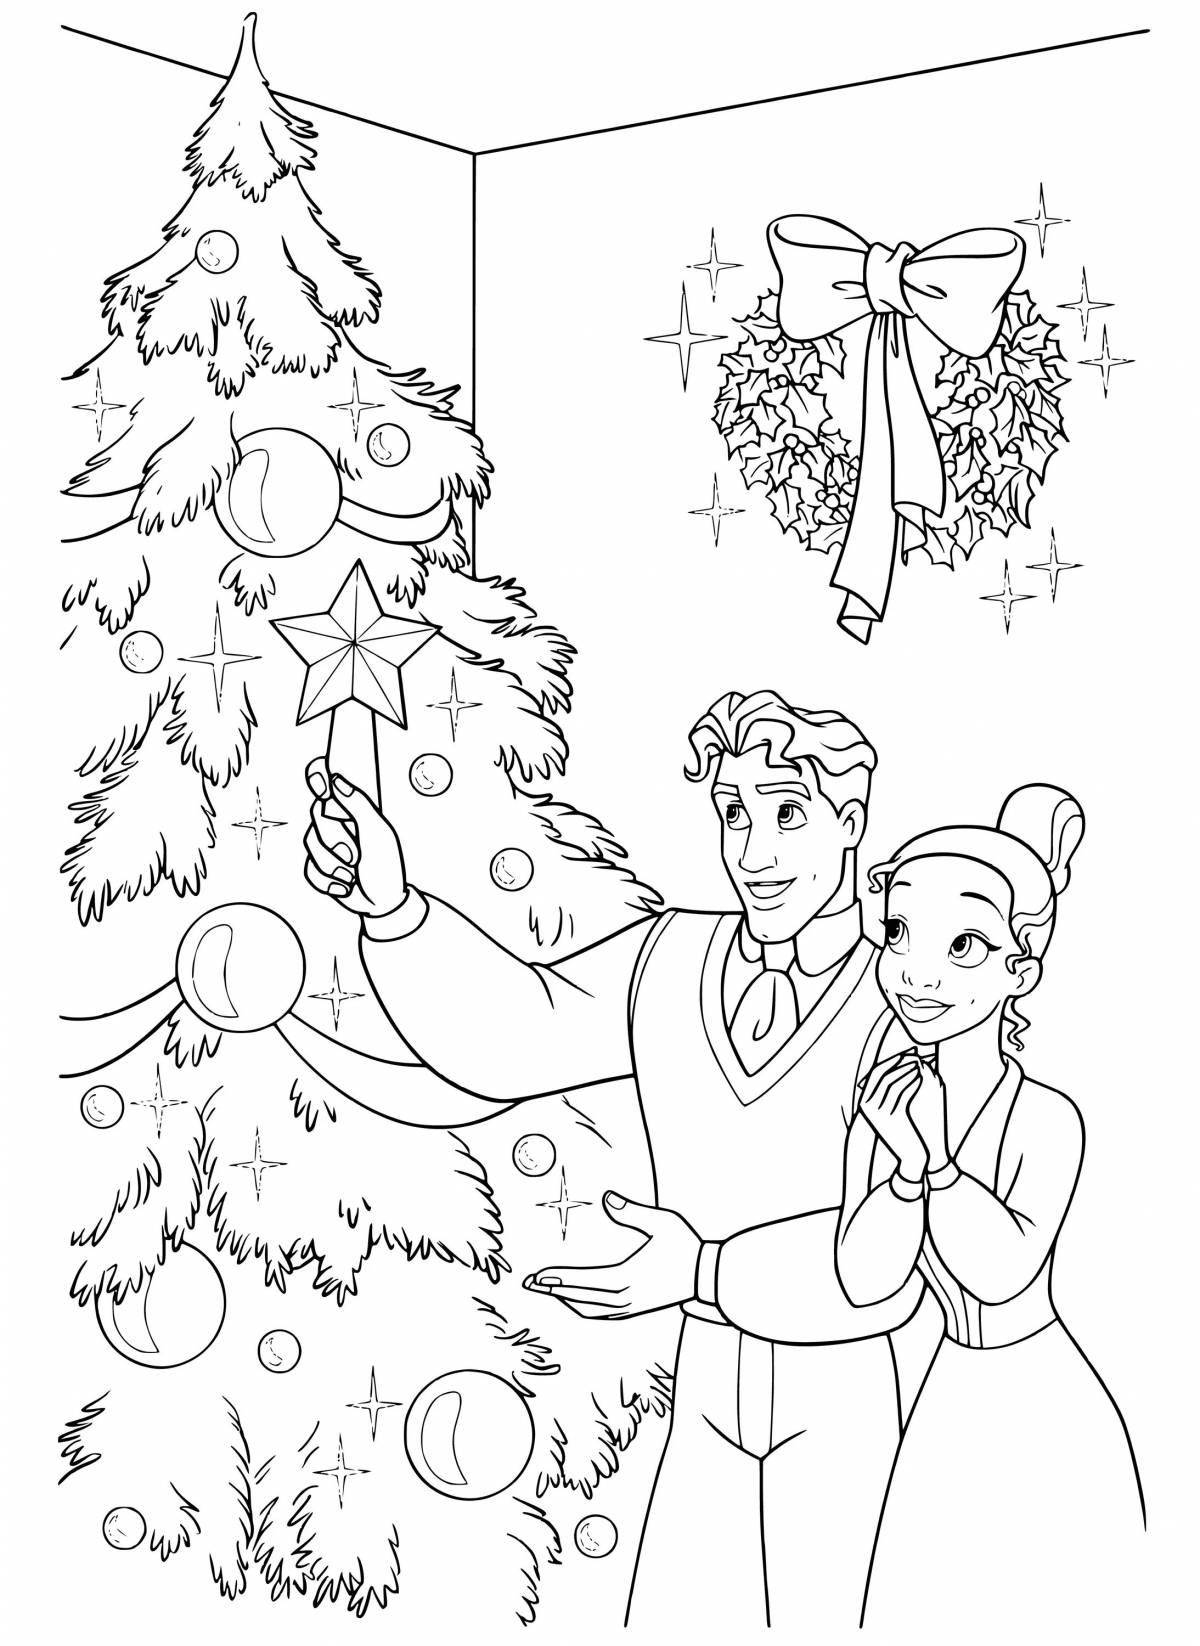 Funny new year family coloring book